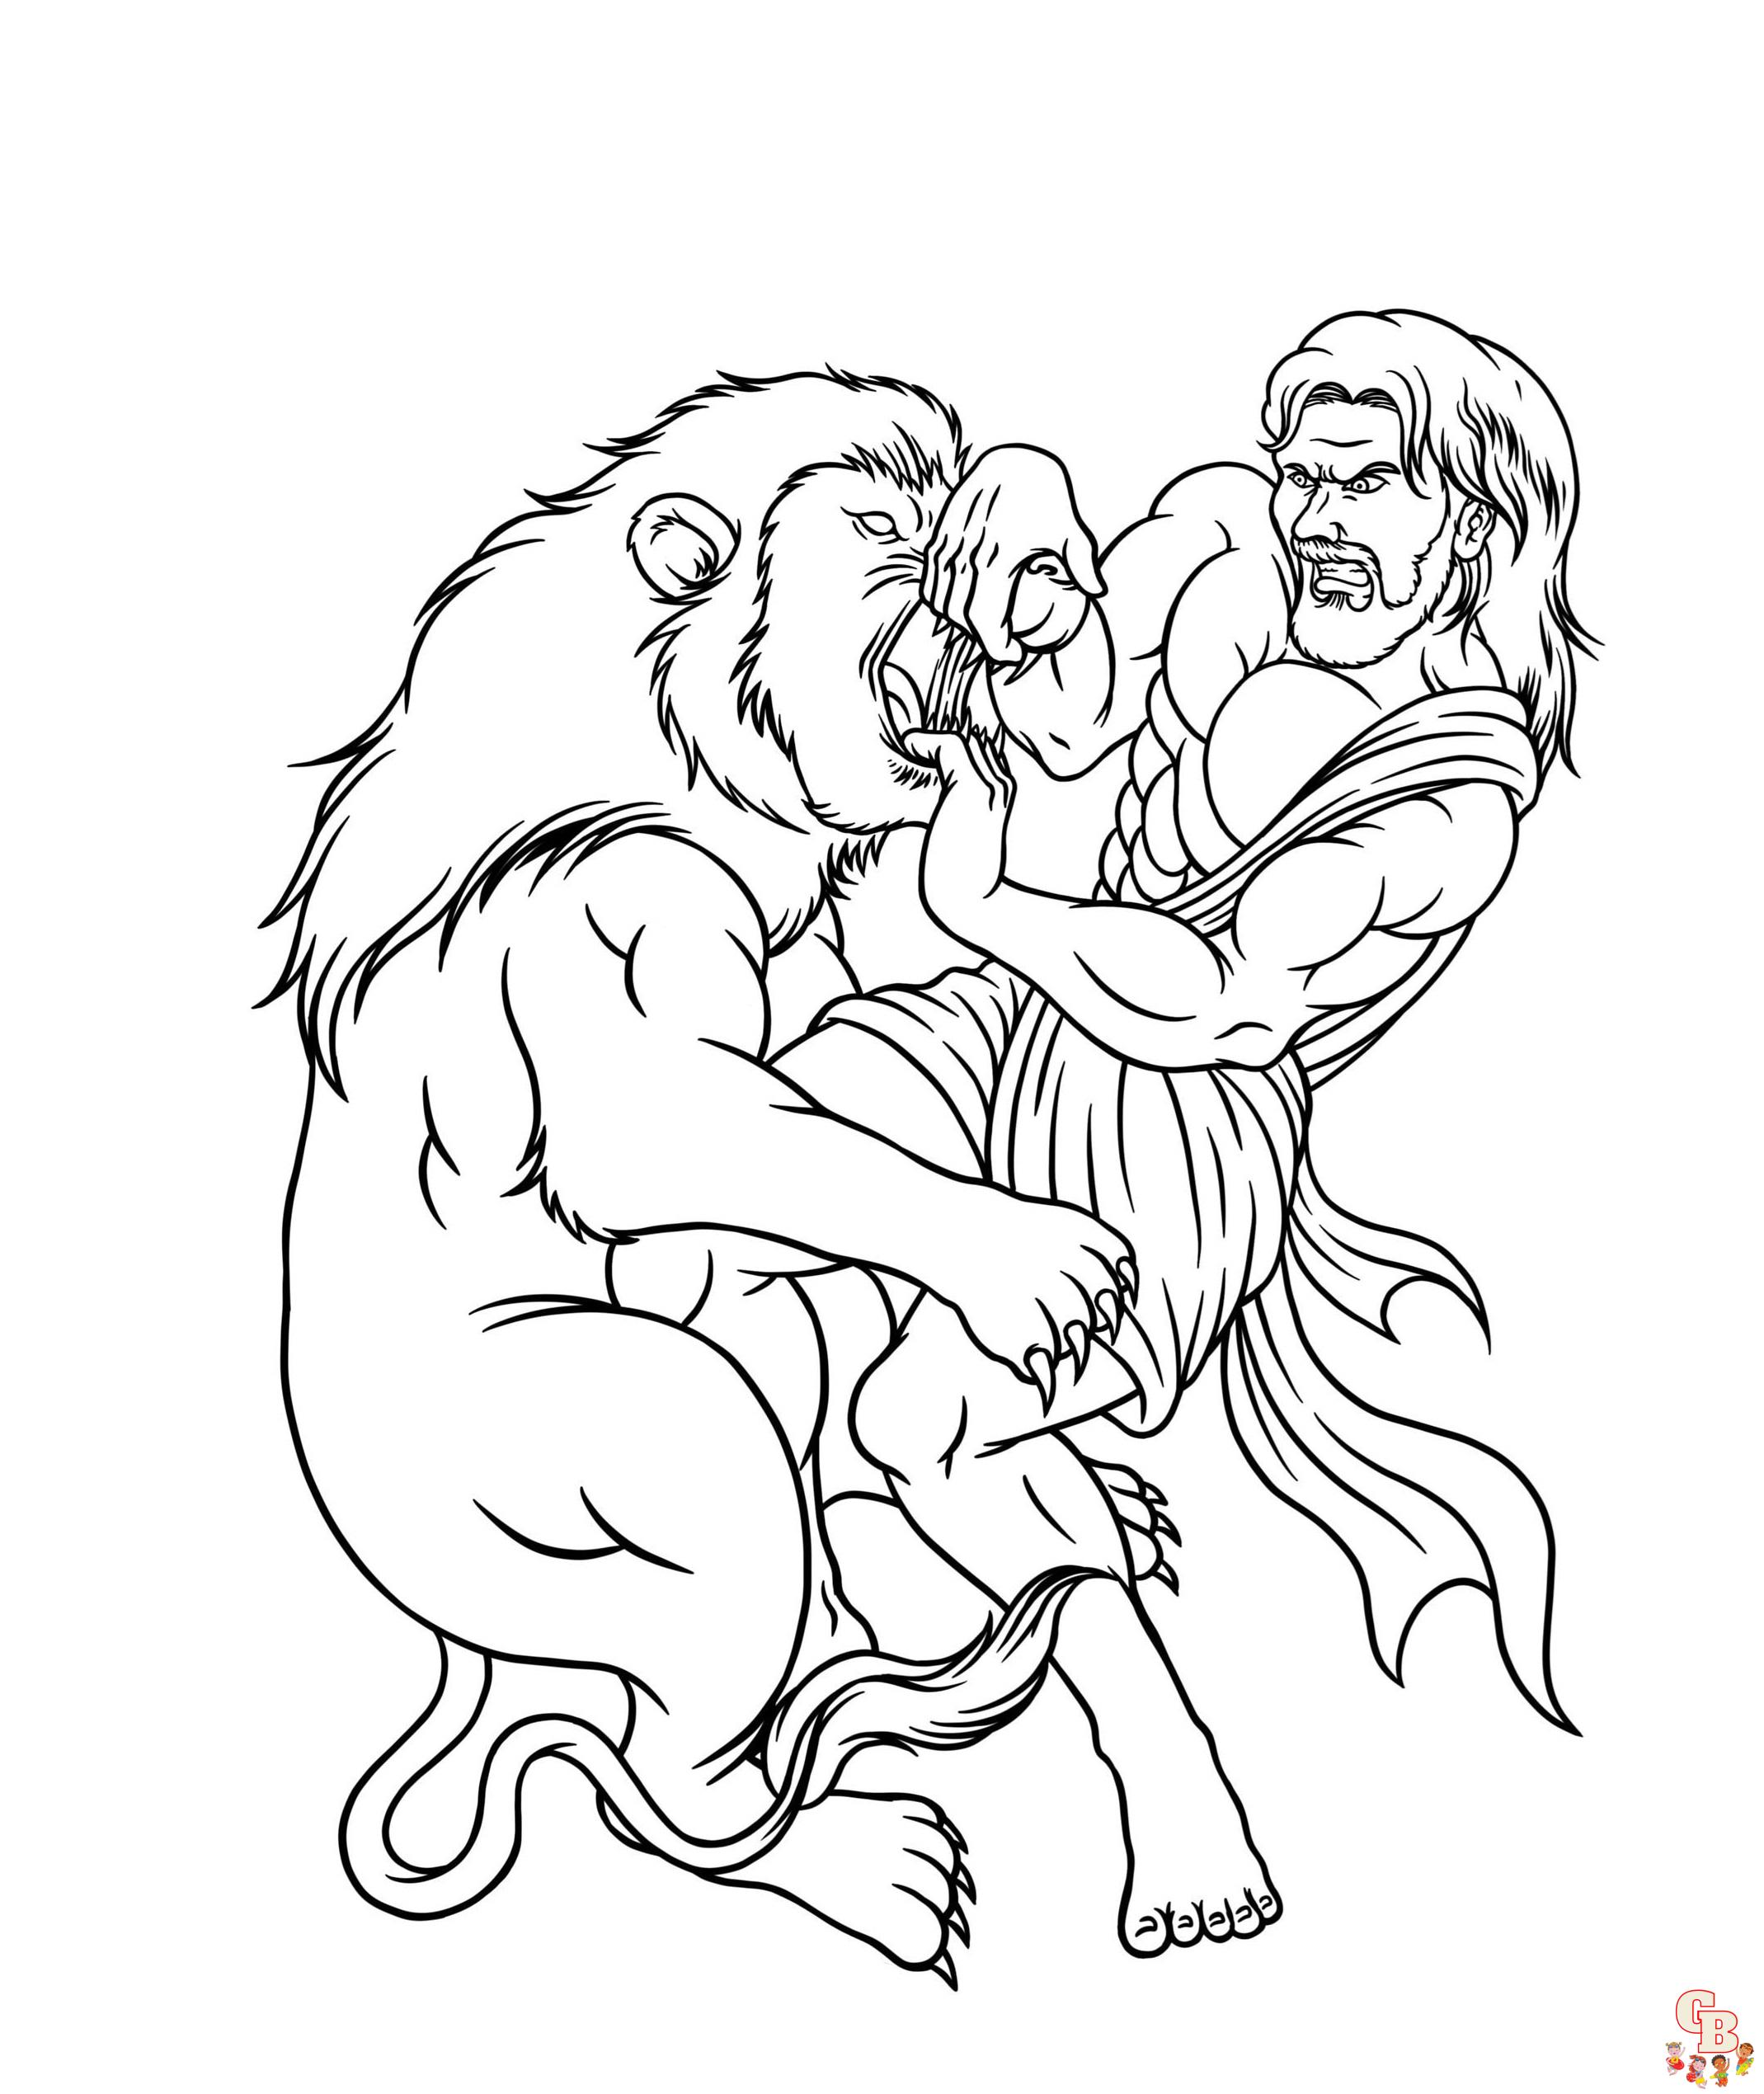 Free Samson coloring pages for kids